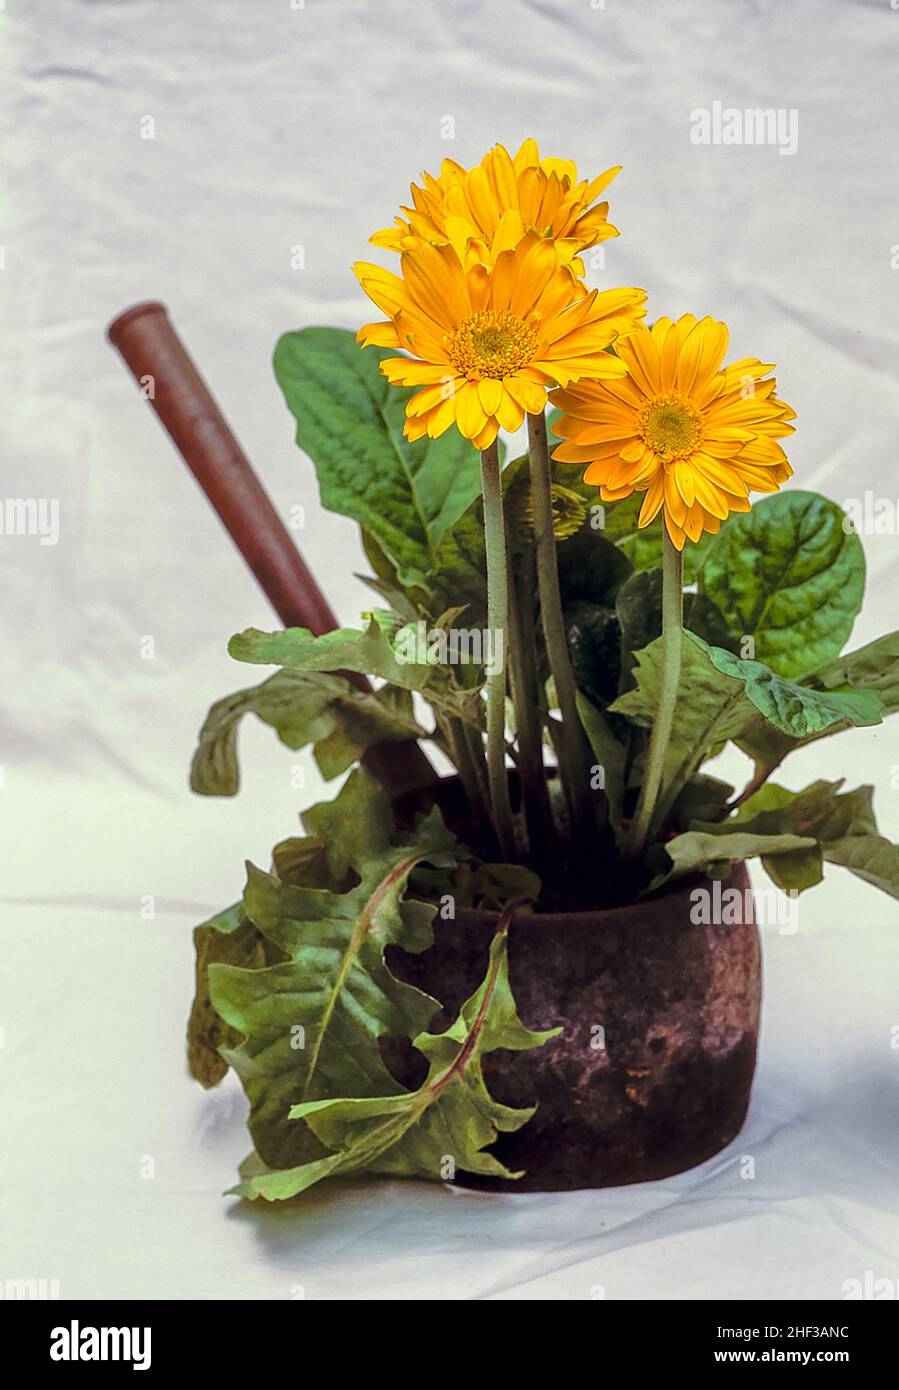 Gerbera jamesonii with yellow flowers growing in a old cast iron cooking pot. A clump forming evergreen that flowers throughout summer. Stock Photo